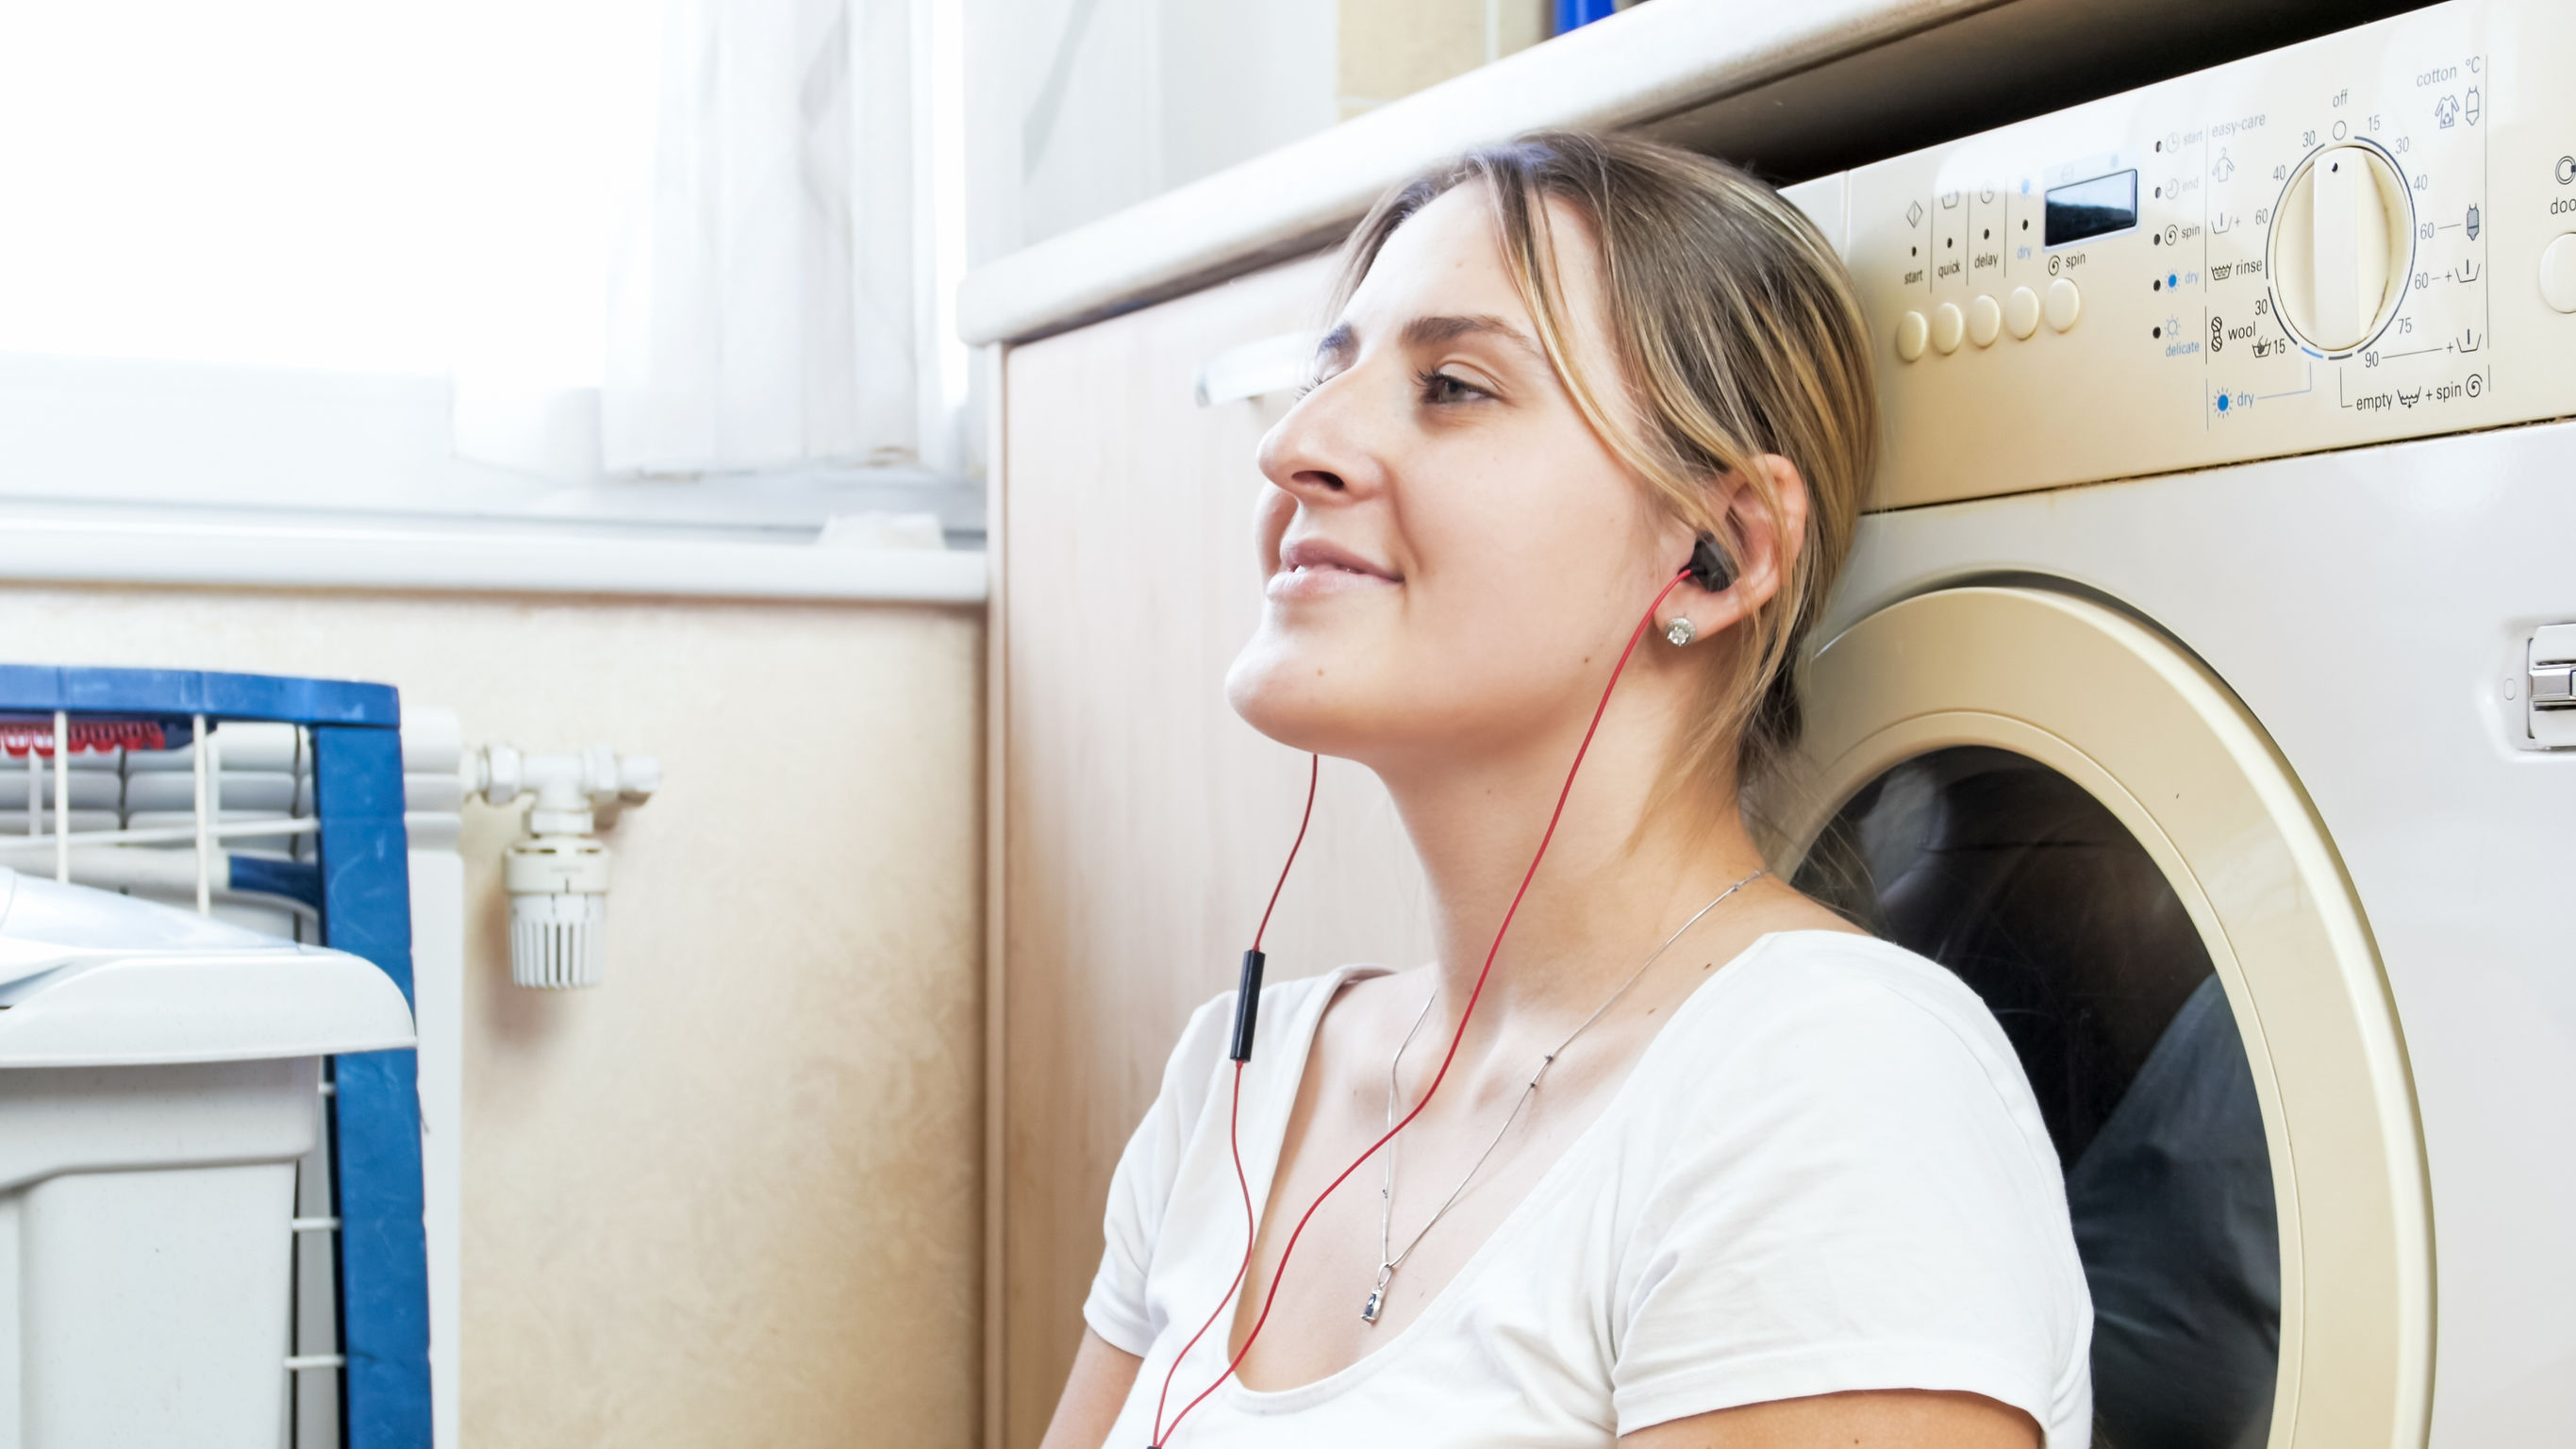 Portrait of beautiful housewife with earphones leaning on washing machine at laundry